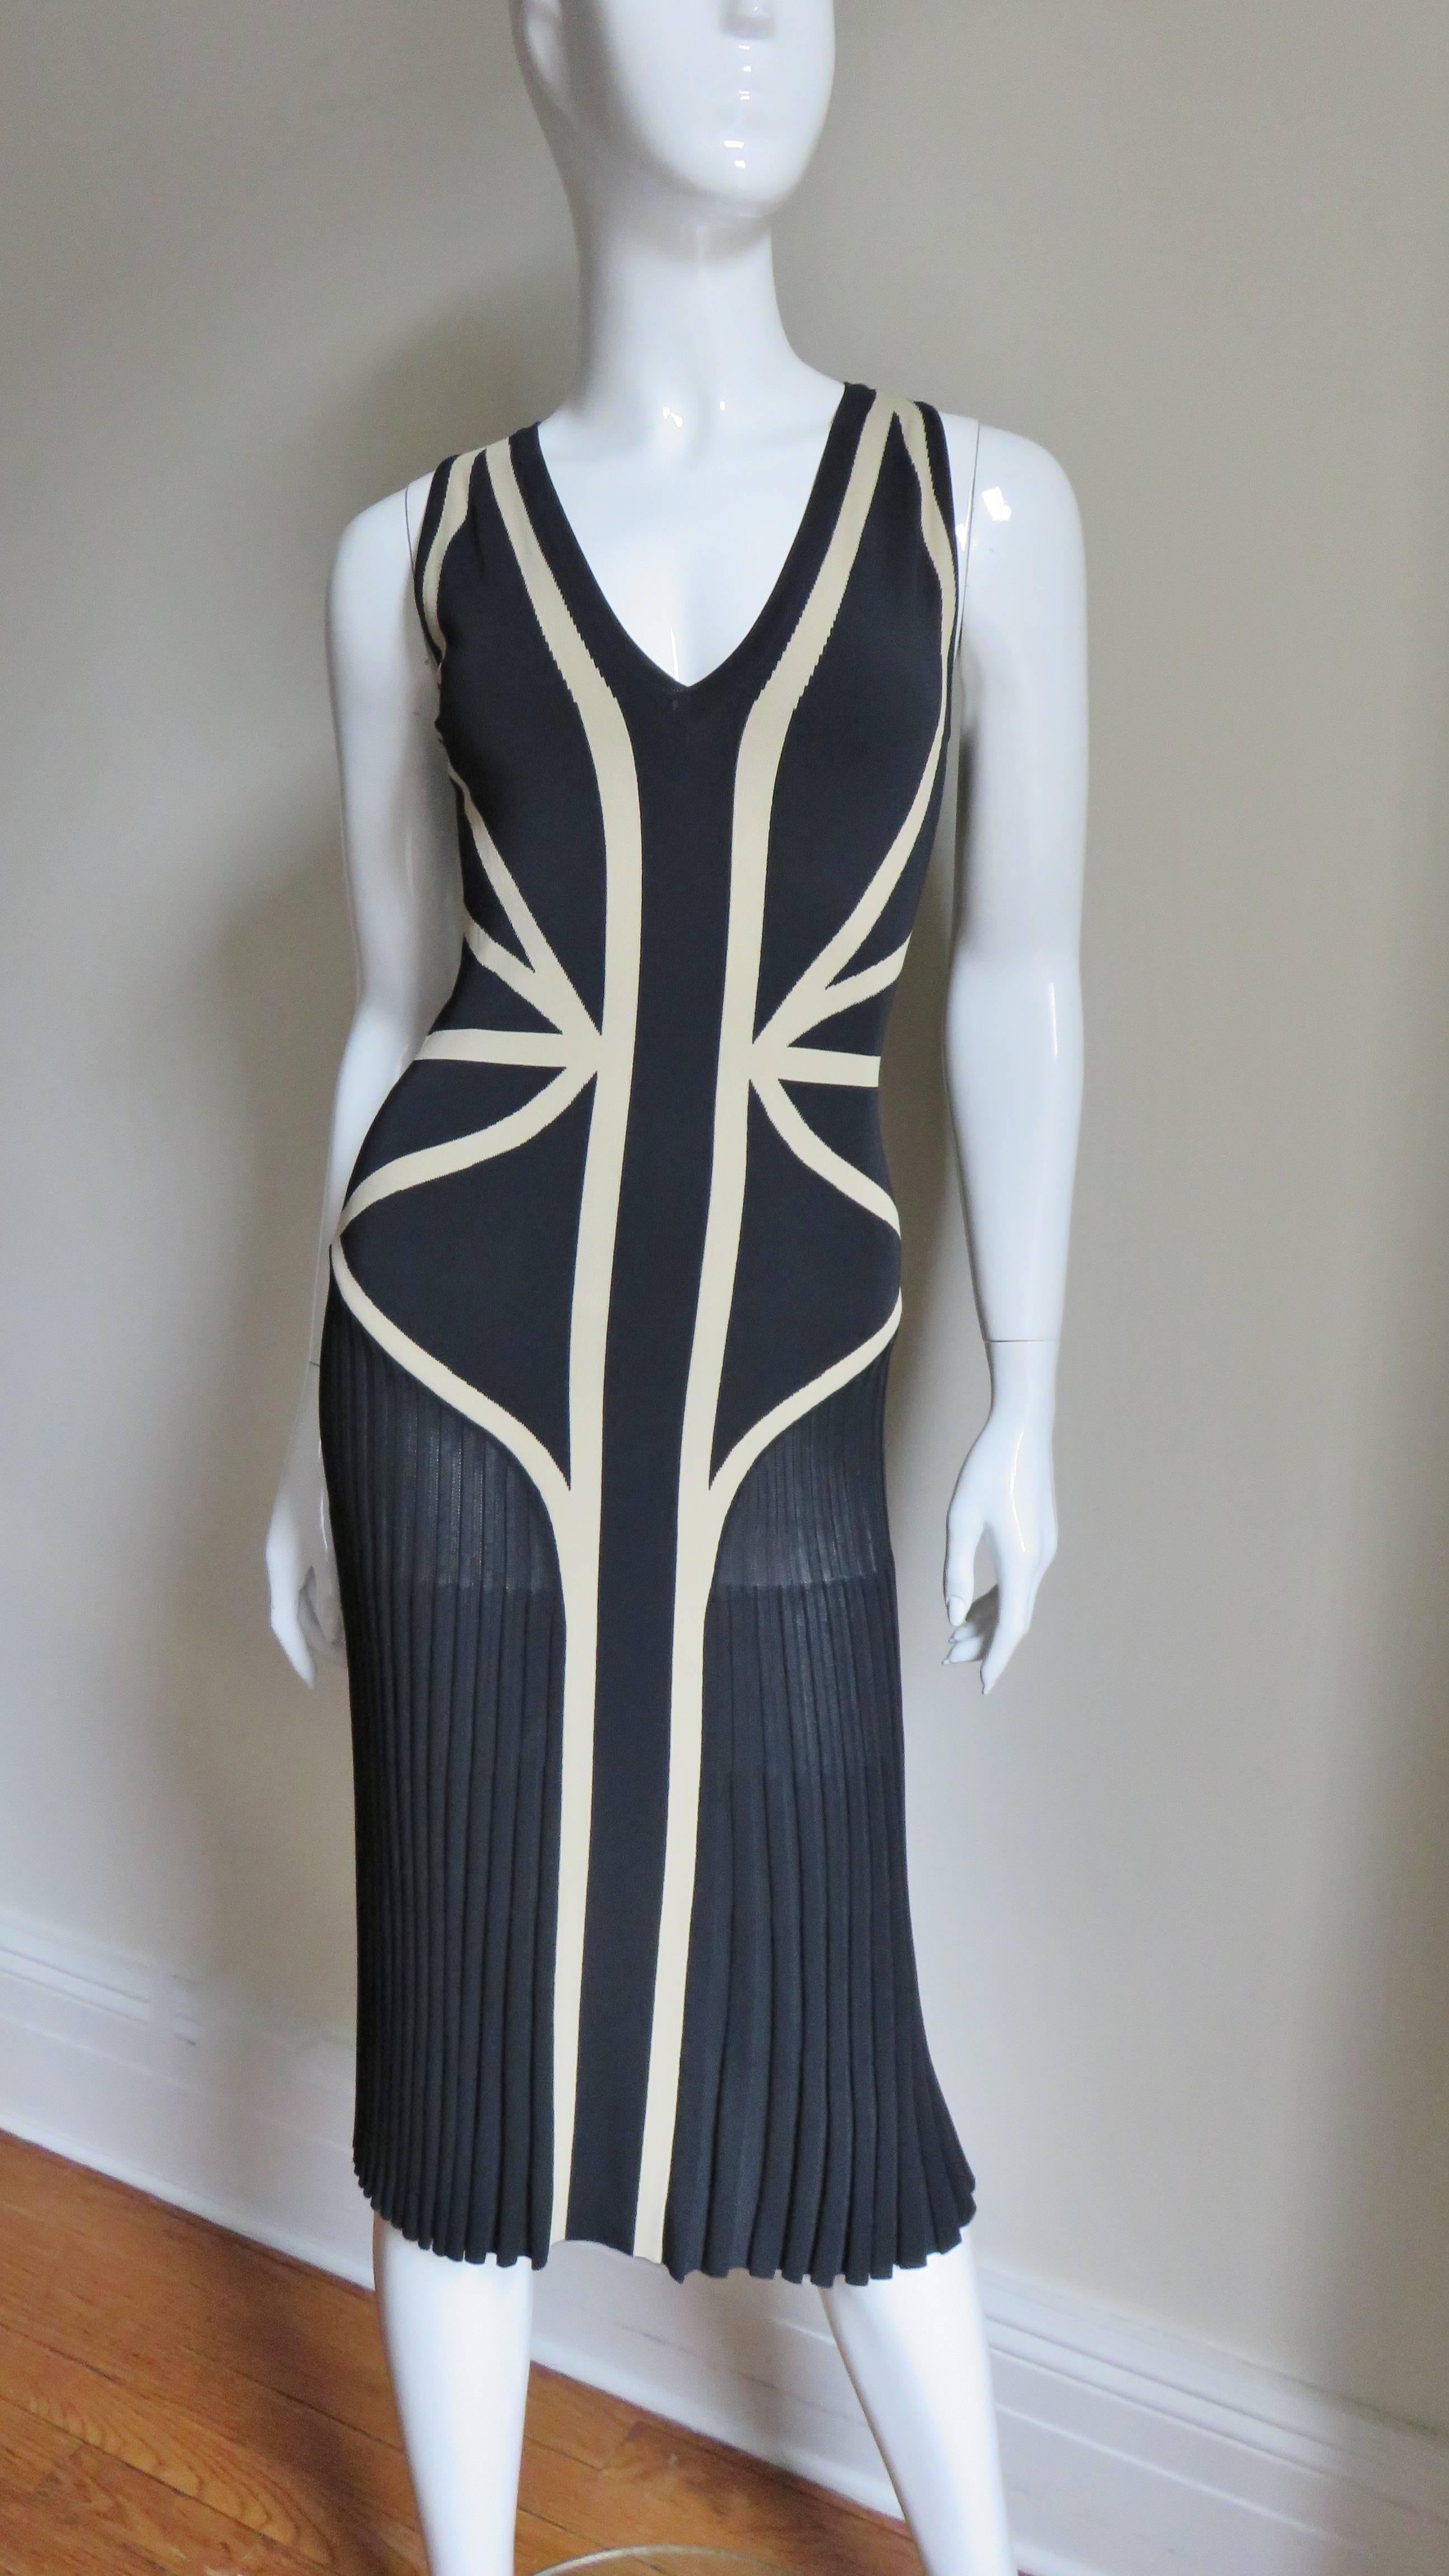 Alexander McQueen Geometric Color Block Bodycon Dress In Excellent Condition For Sale In Water Mill, NY